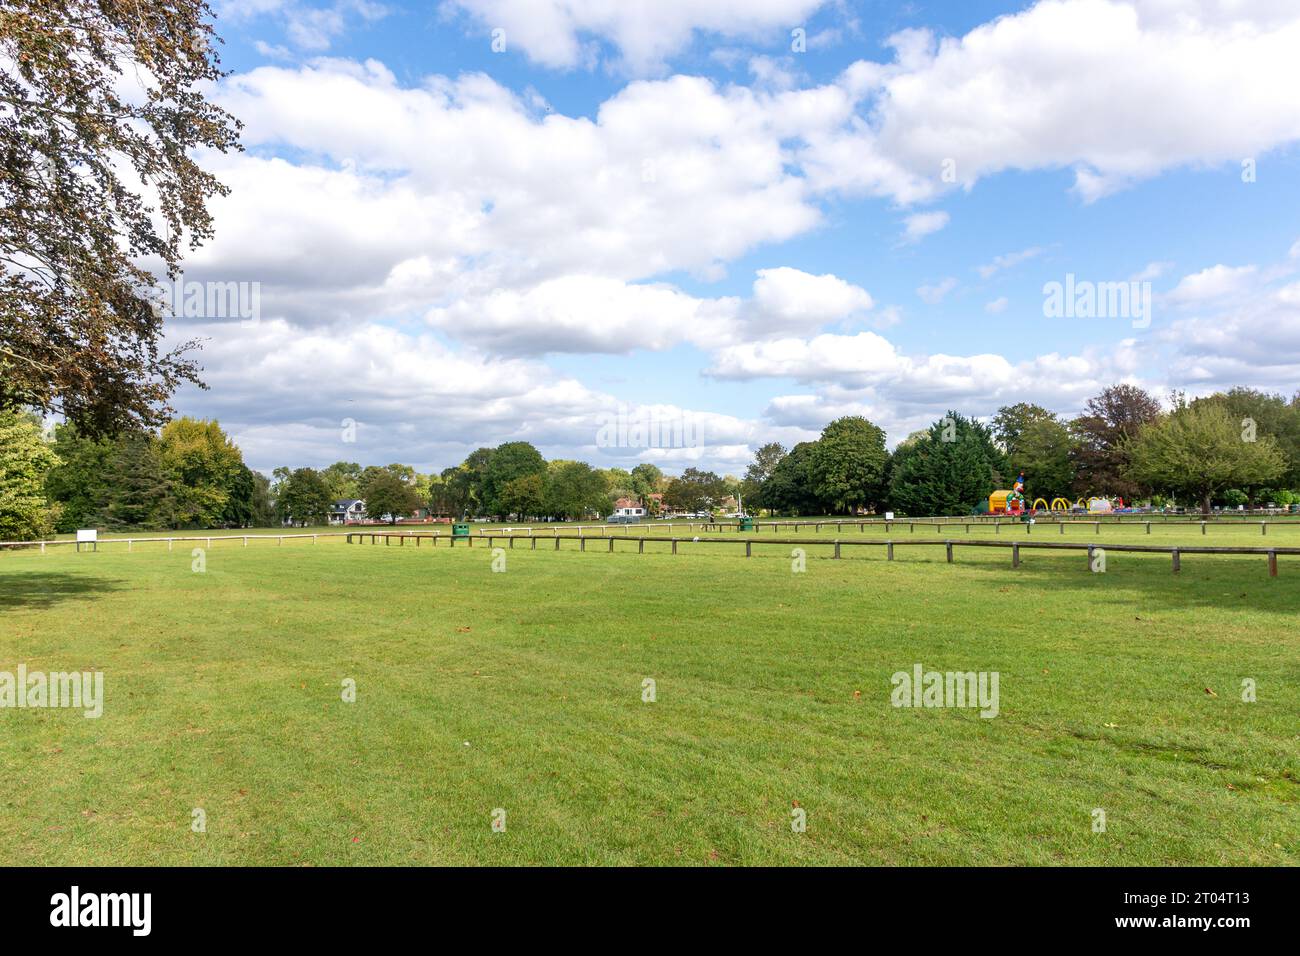 Runnymede Pleasure Ground, Runnymede, Surrey, Angleterre, Royaume-Uni Banque D'Images